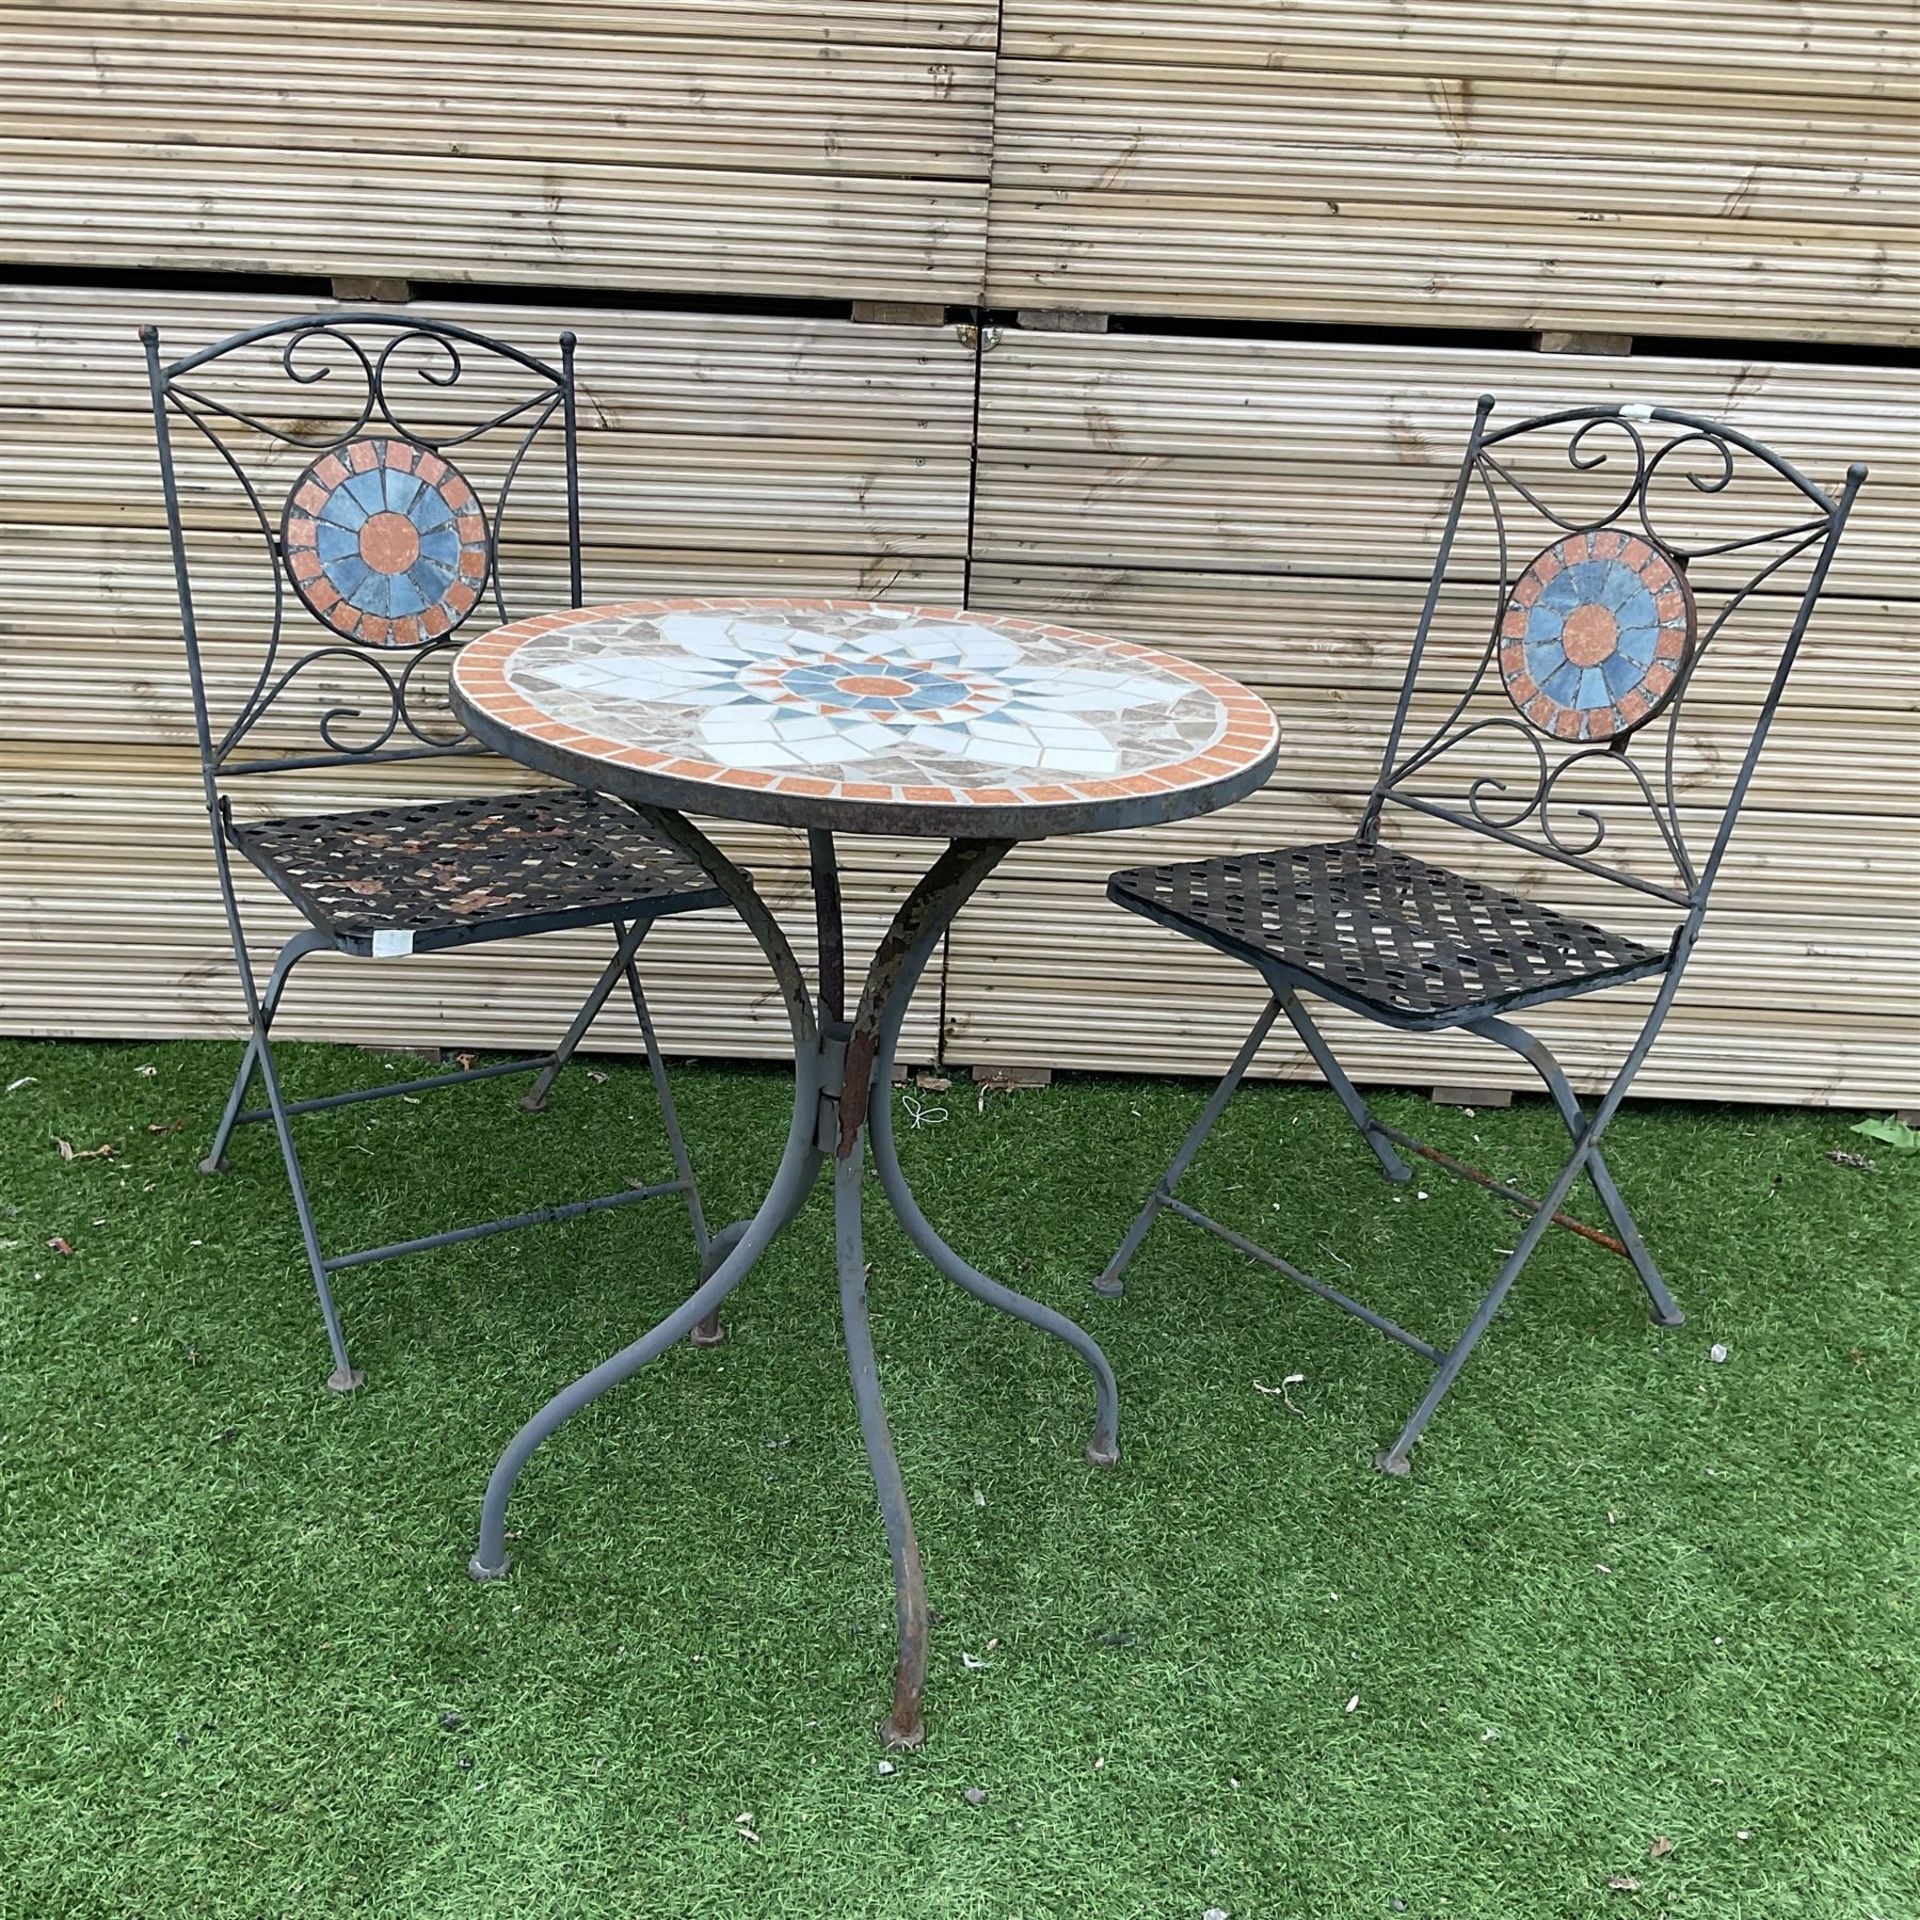 Mosaic garden table and two folding chairs